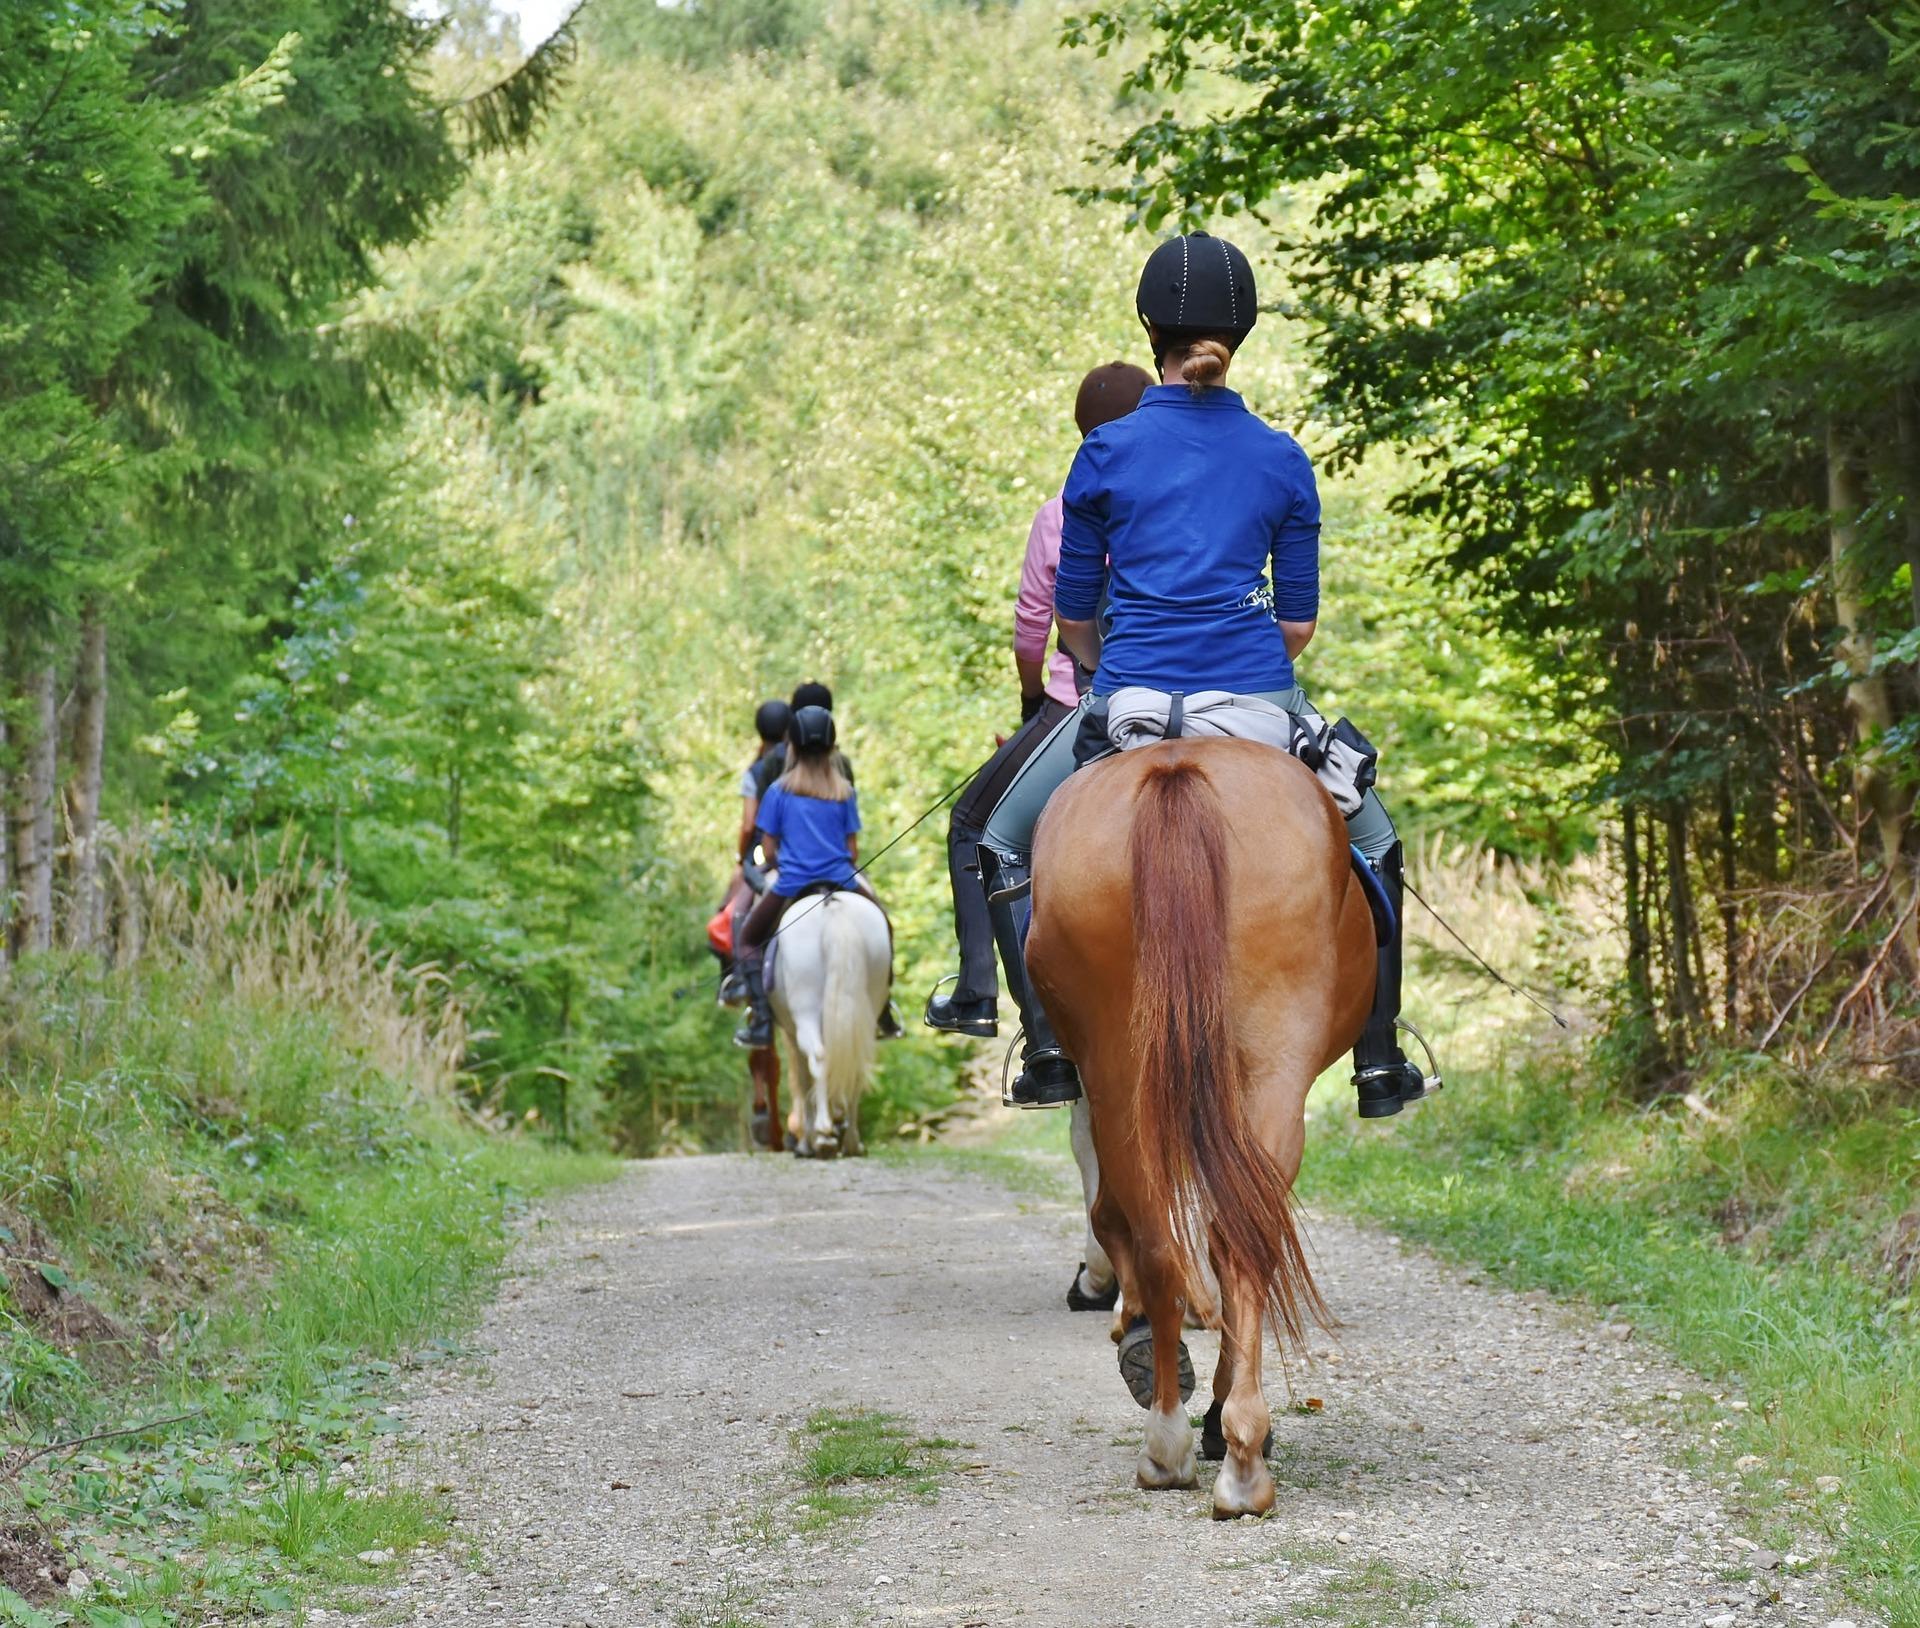 2 horses with 2 people on each walking down a wooded path